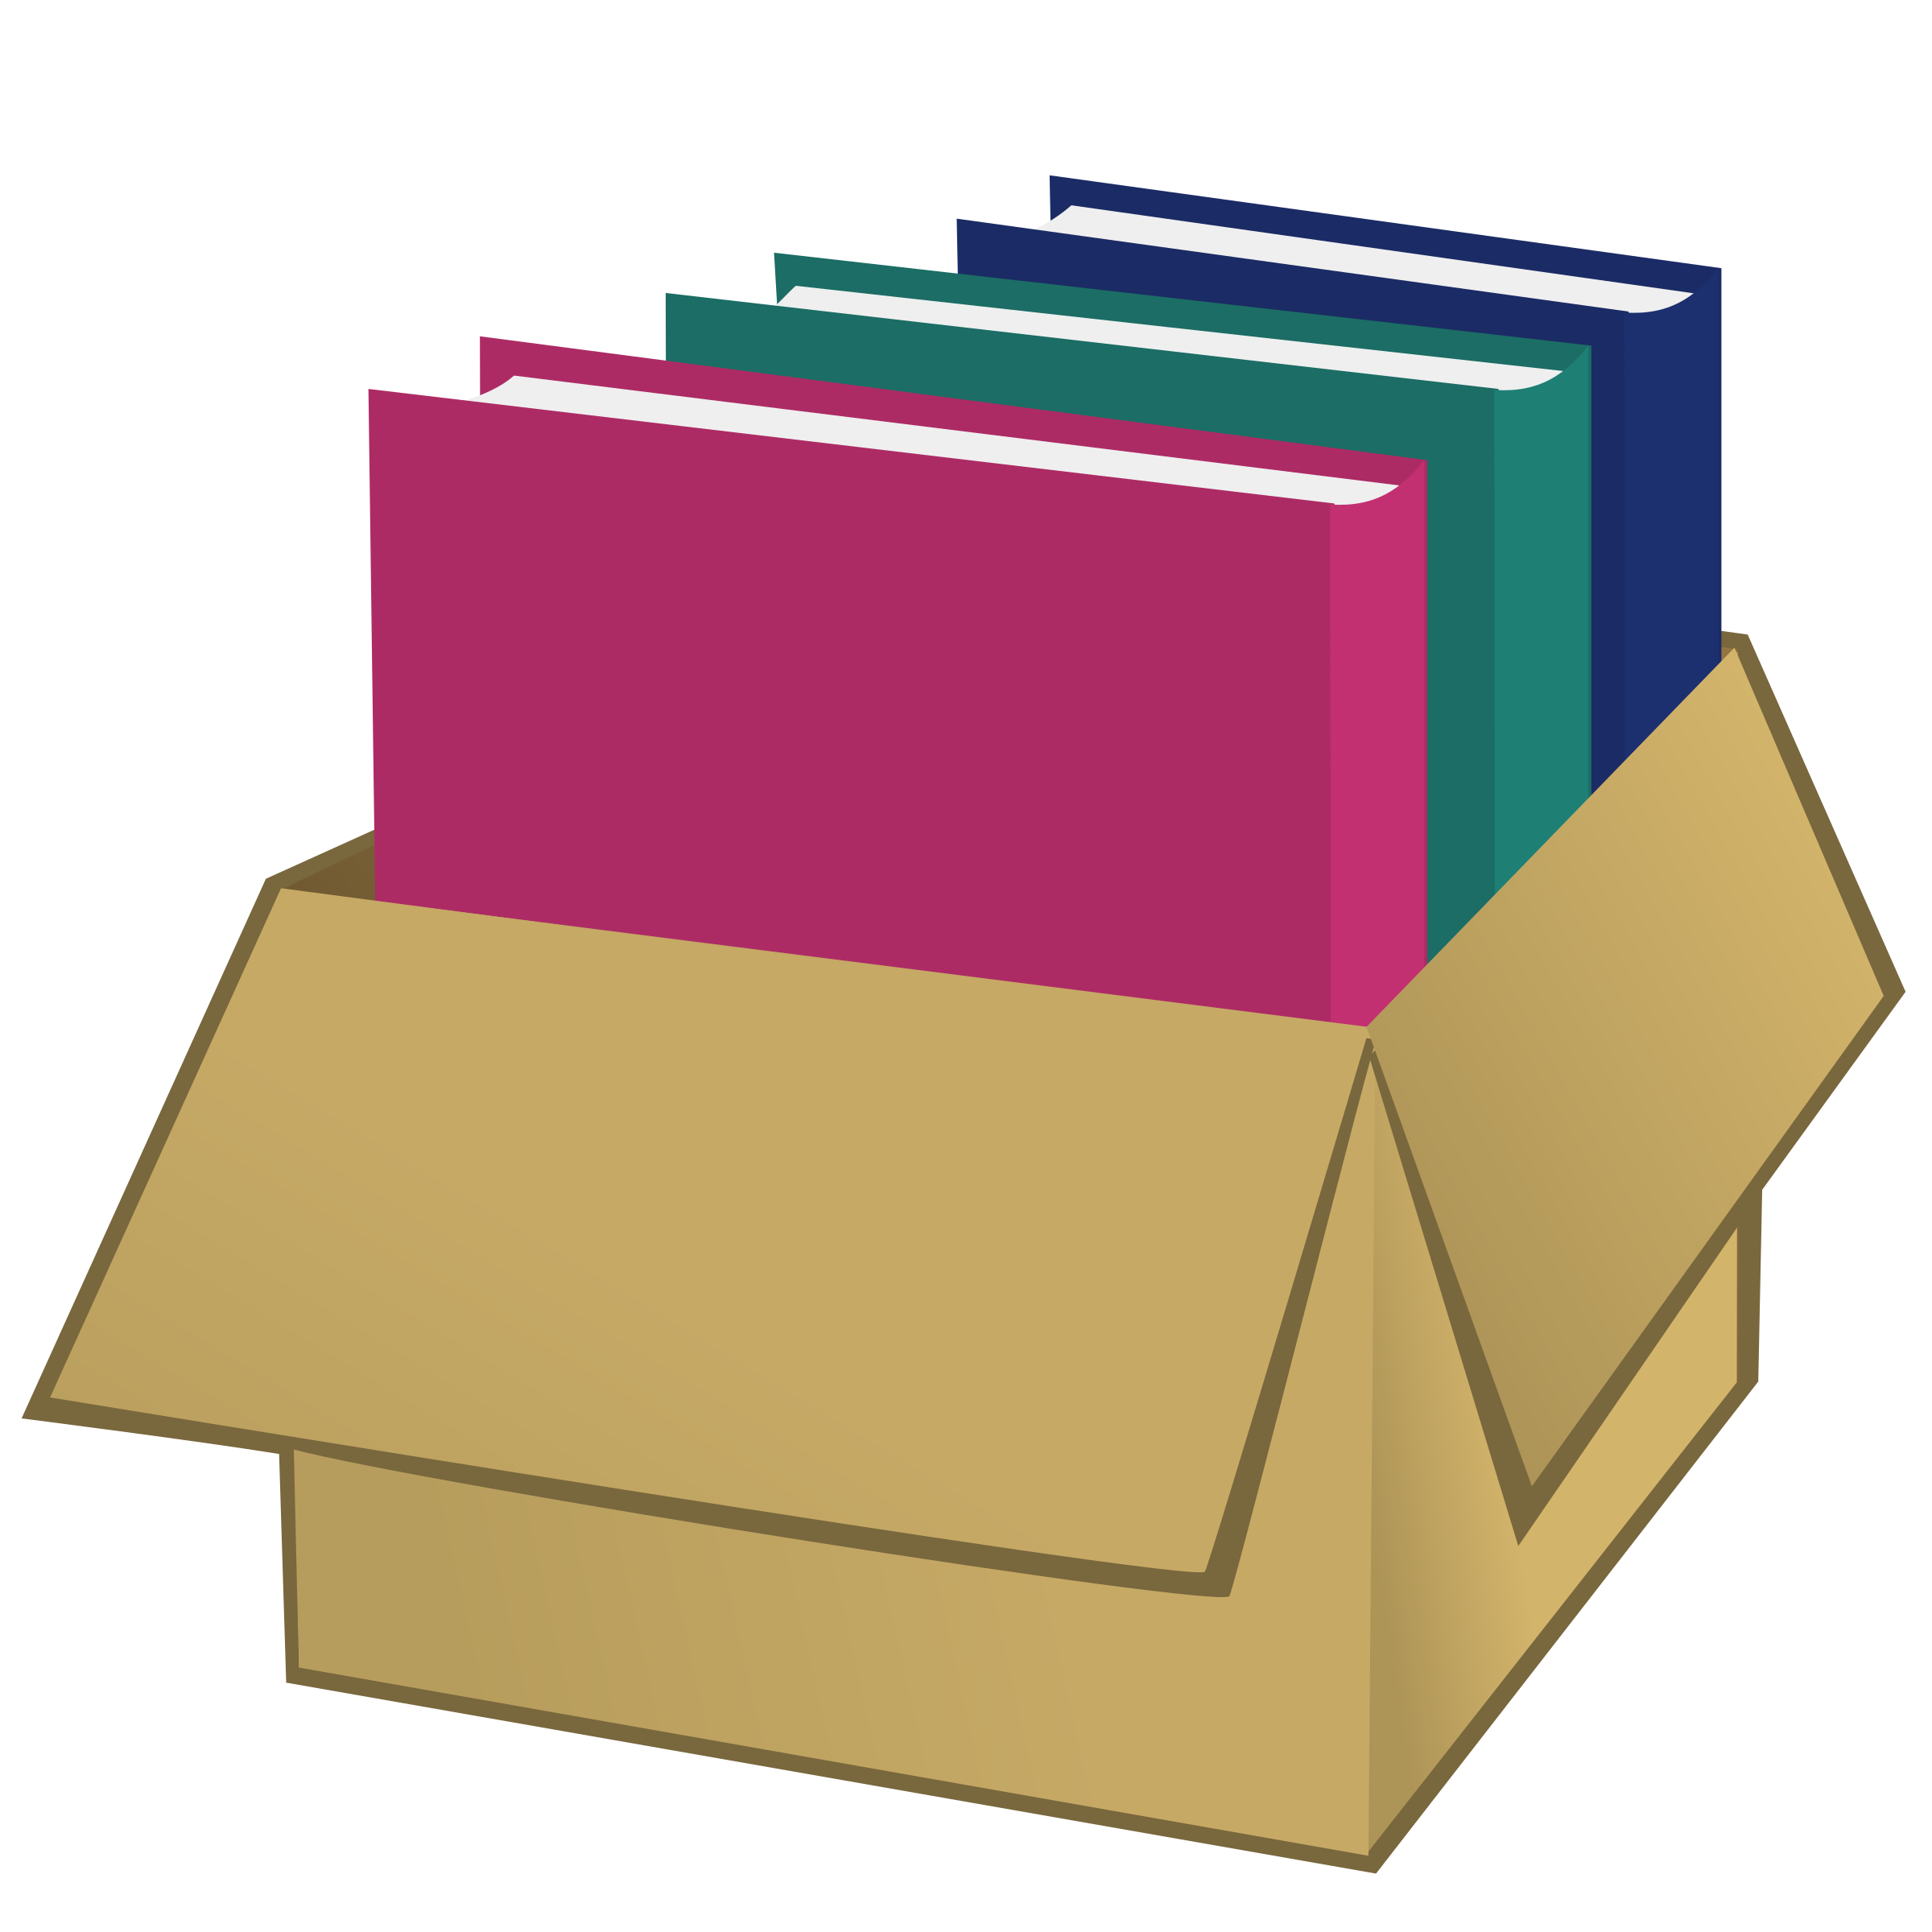 Clipart box. With folders big image